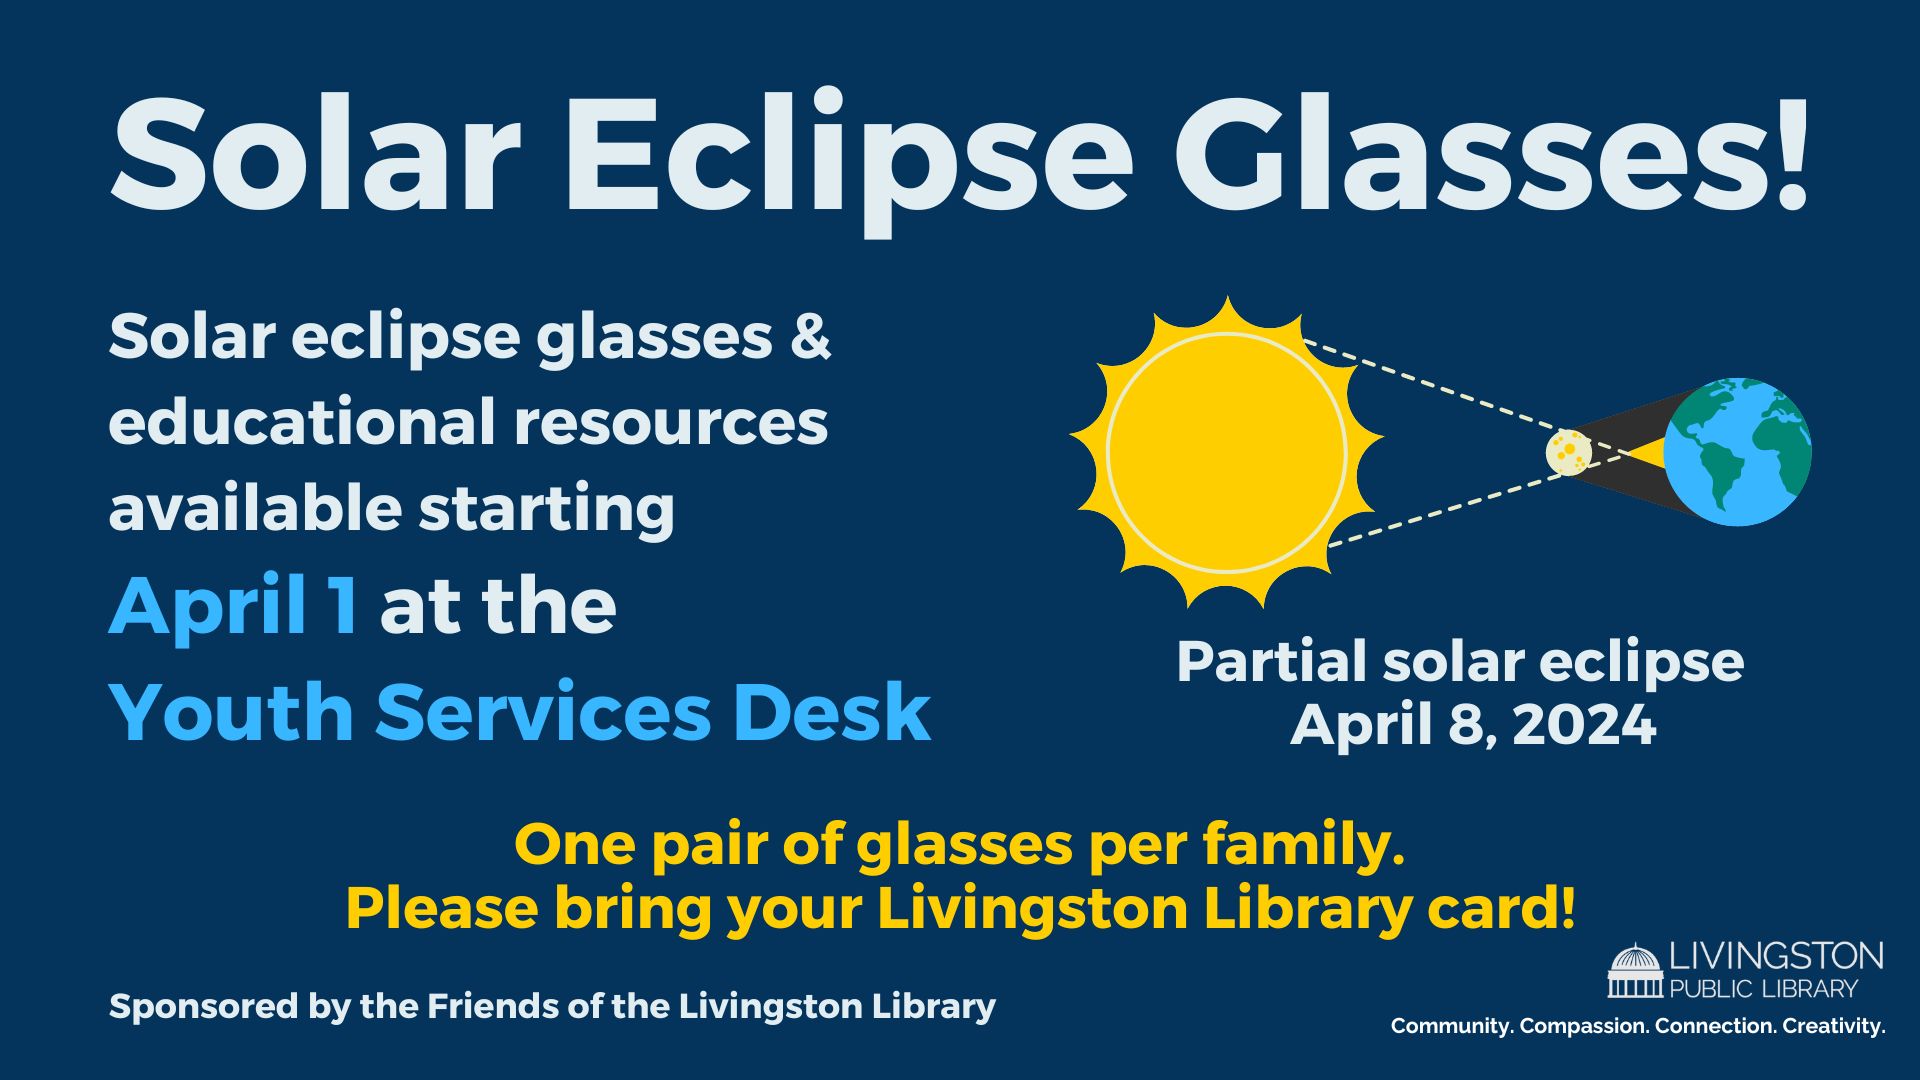 Solar eclipse glasses & educational resources available starting April 1 at the Youth Services Desk. One pair of glasses per family, please. Diagram of a solar eclipse. Partial solar eclipse April 8, 2024. Sponsored by the Friends of the Livingston Library. Livingston Library log with the tagline Community. Compassion. Connection. Creativity.